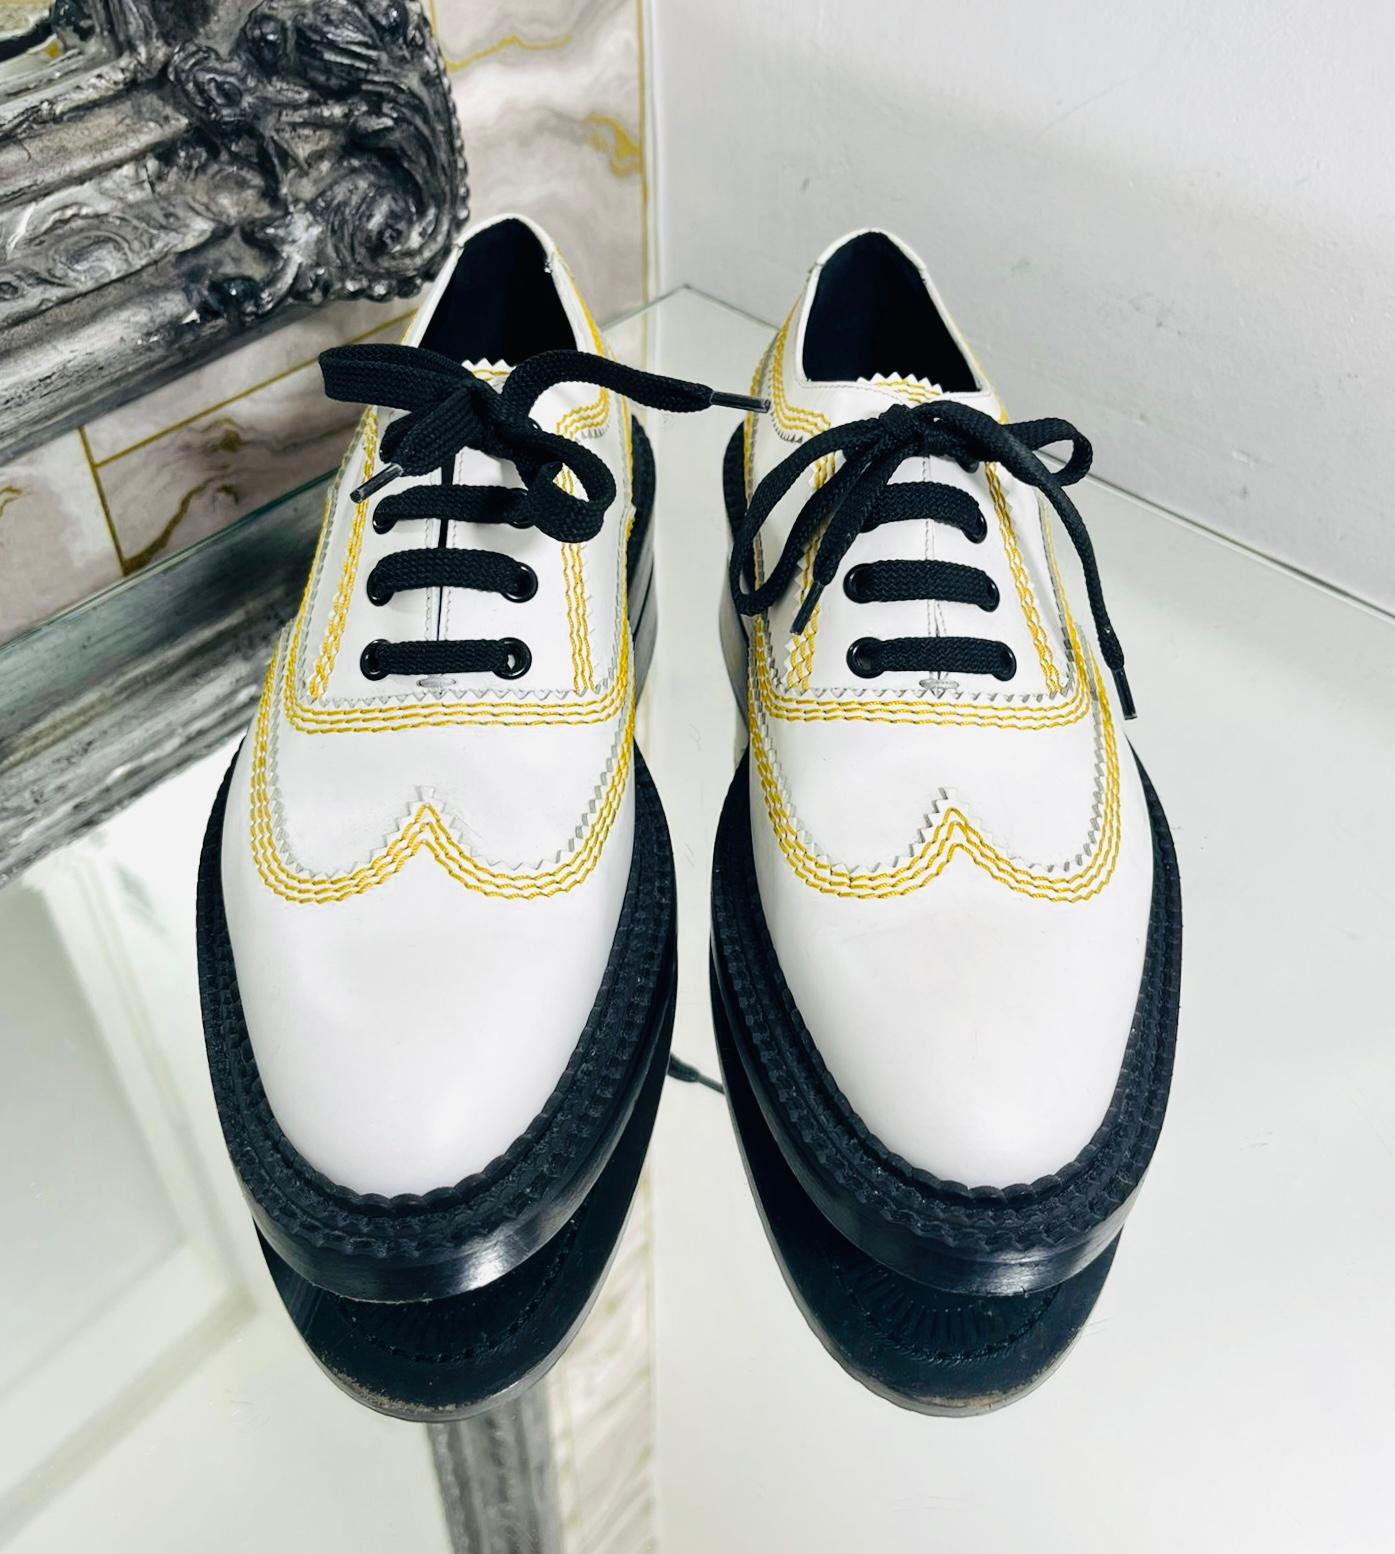 Burberry Bertram Topstitched Leather Brogues

White, black laced-up flats designed with yellow, decorative topstitching and trims detail.

Featuring contrasting black soles with short block heel and almond toe. Rrp £720

Size – 40

Condition – Good